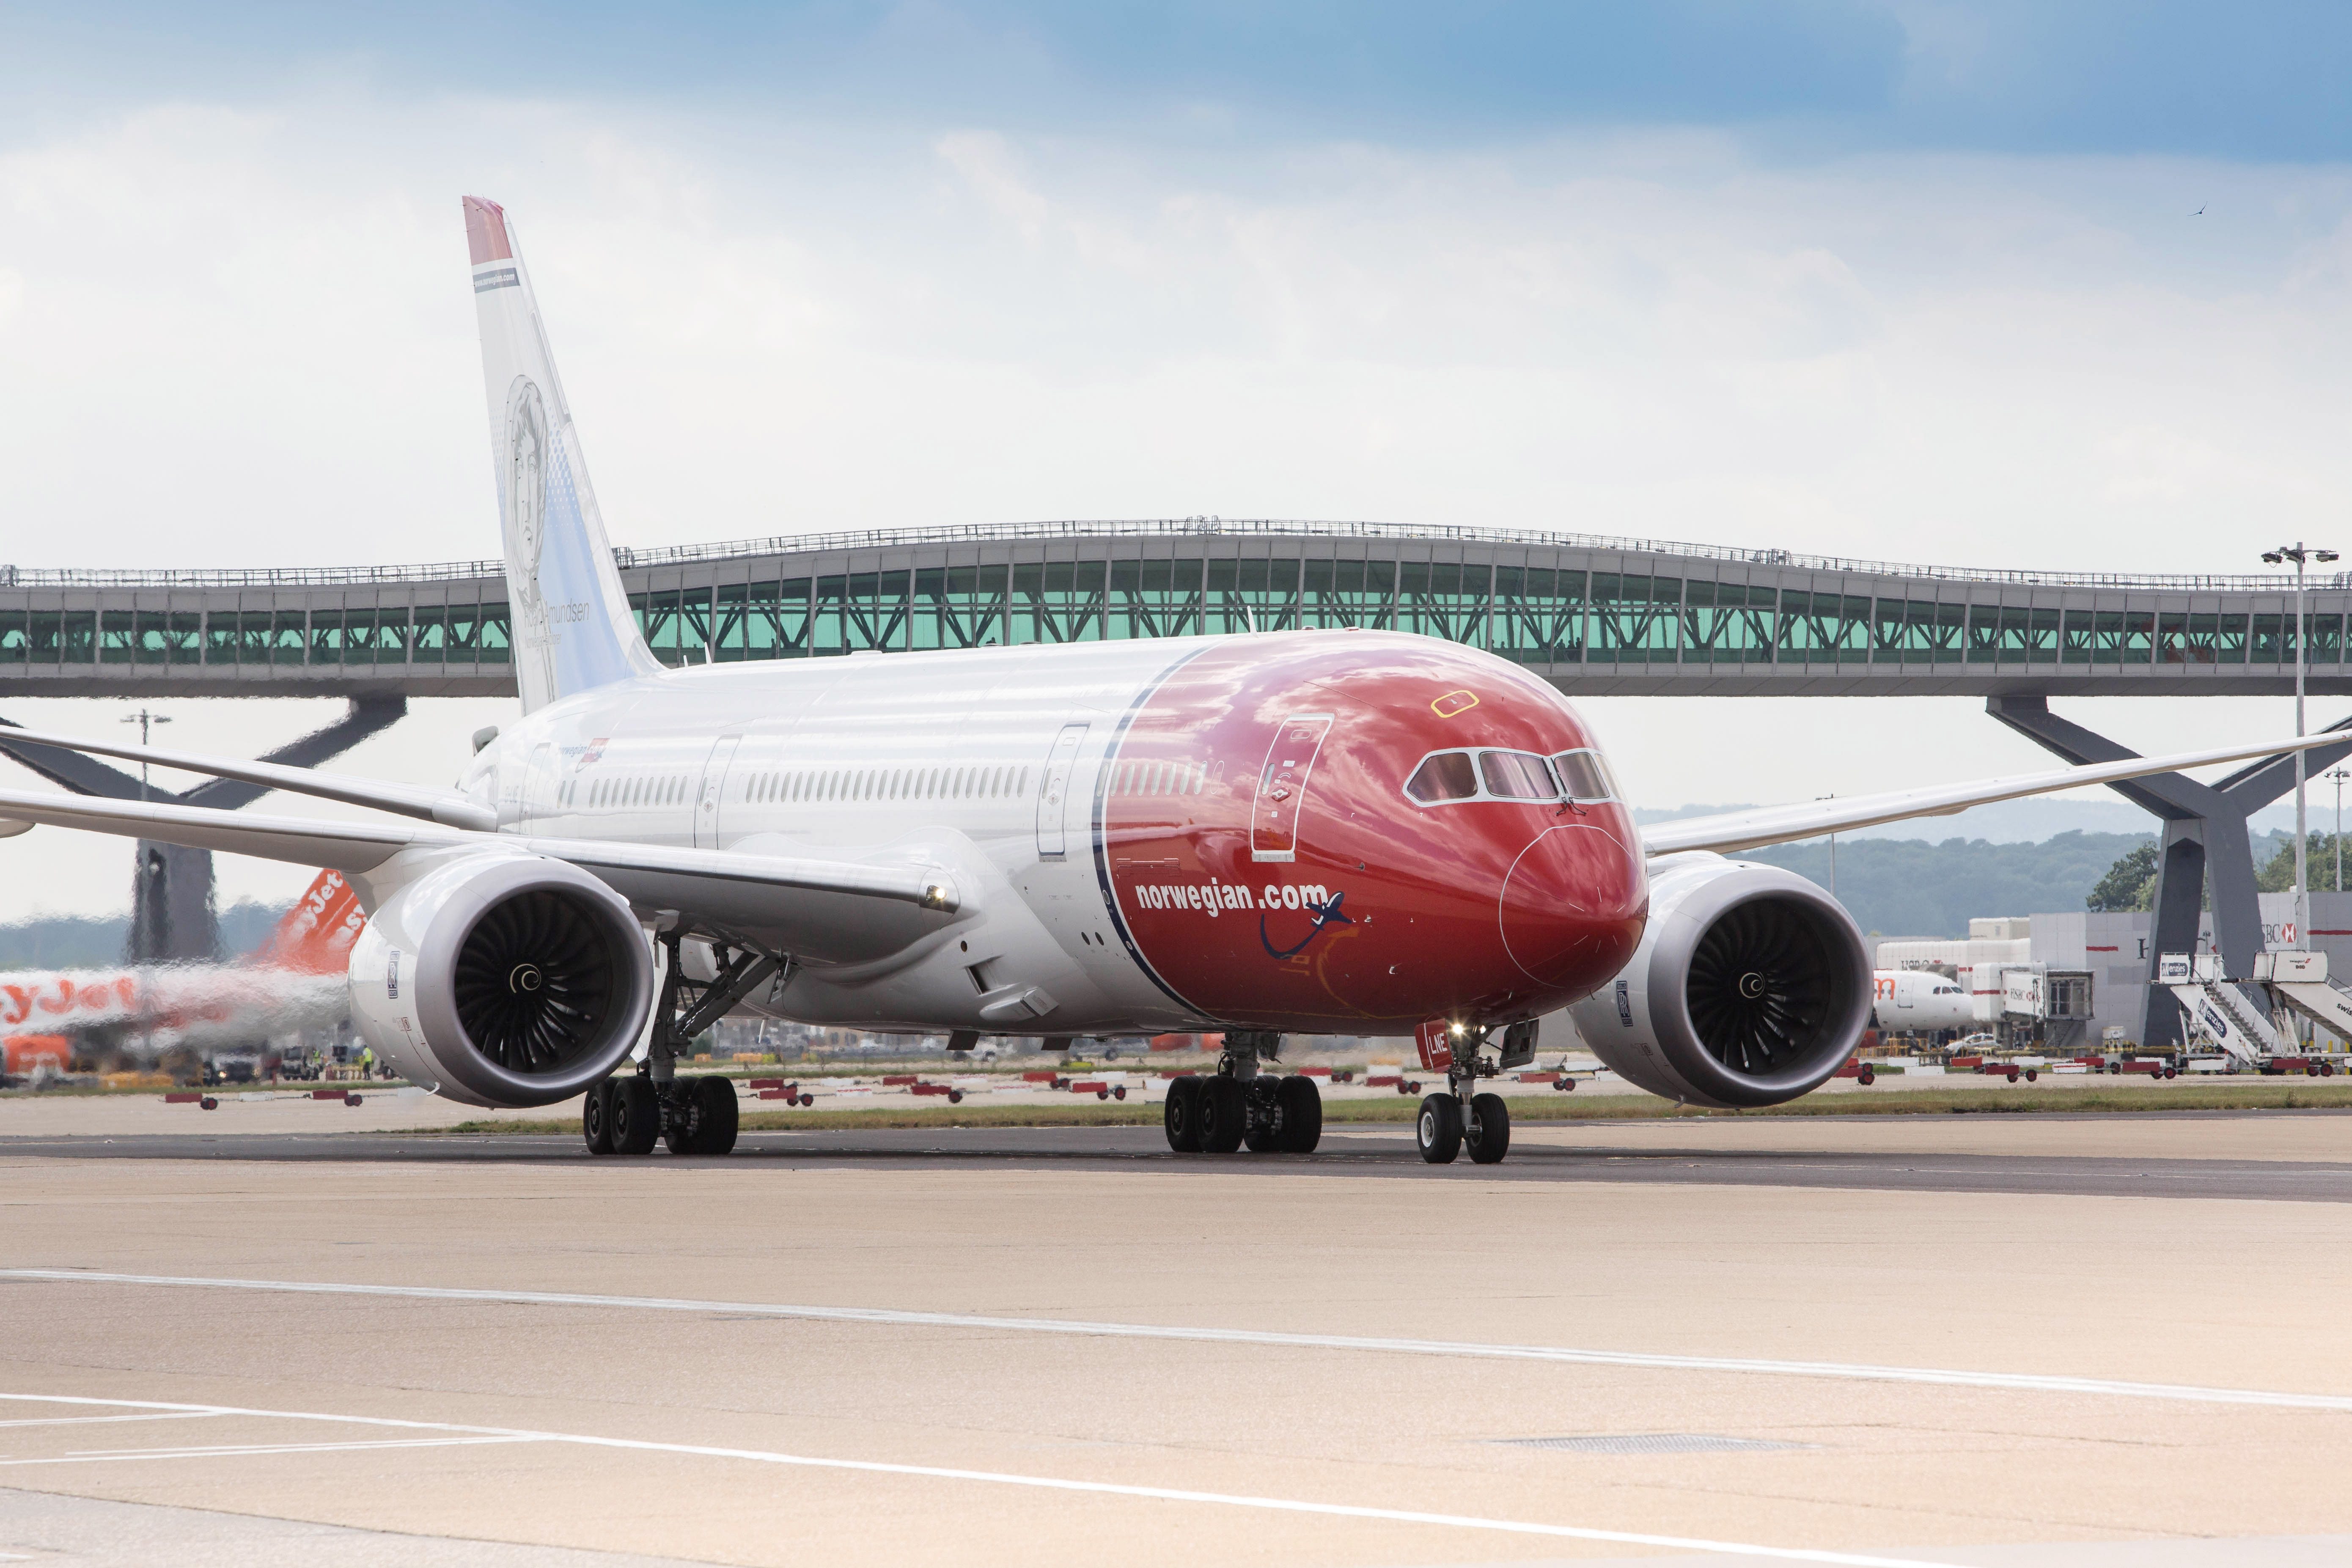 Norwegian Air to raise additional cash before bankruptcy exit